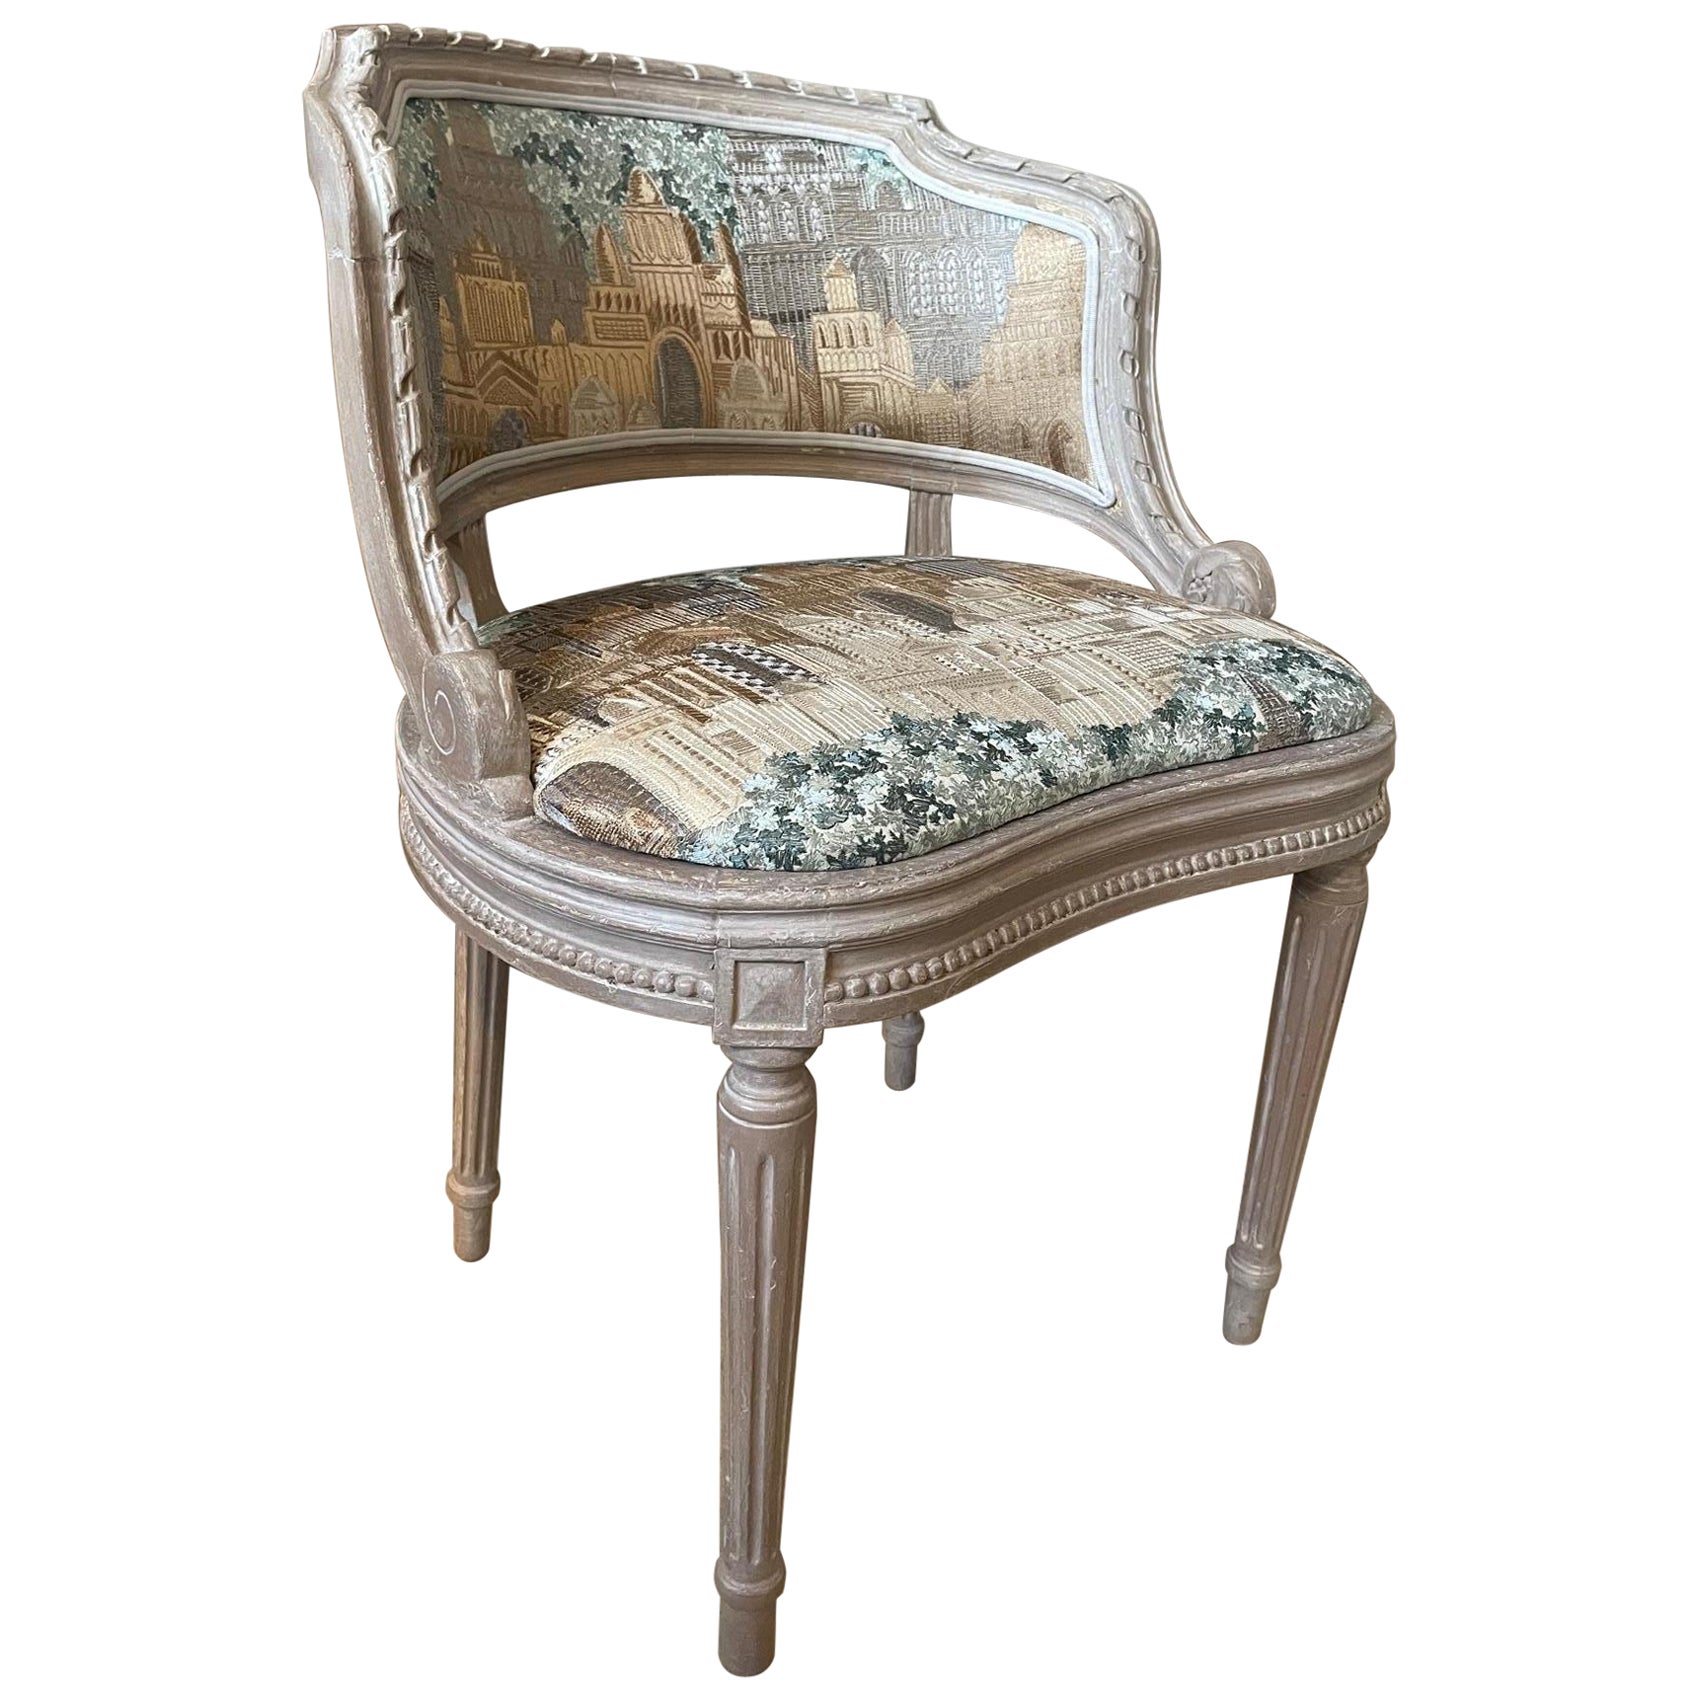 Early 20th Century French Louis XVI Style Reupholstery Chair, 1900s